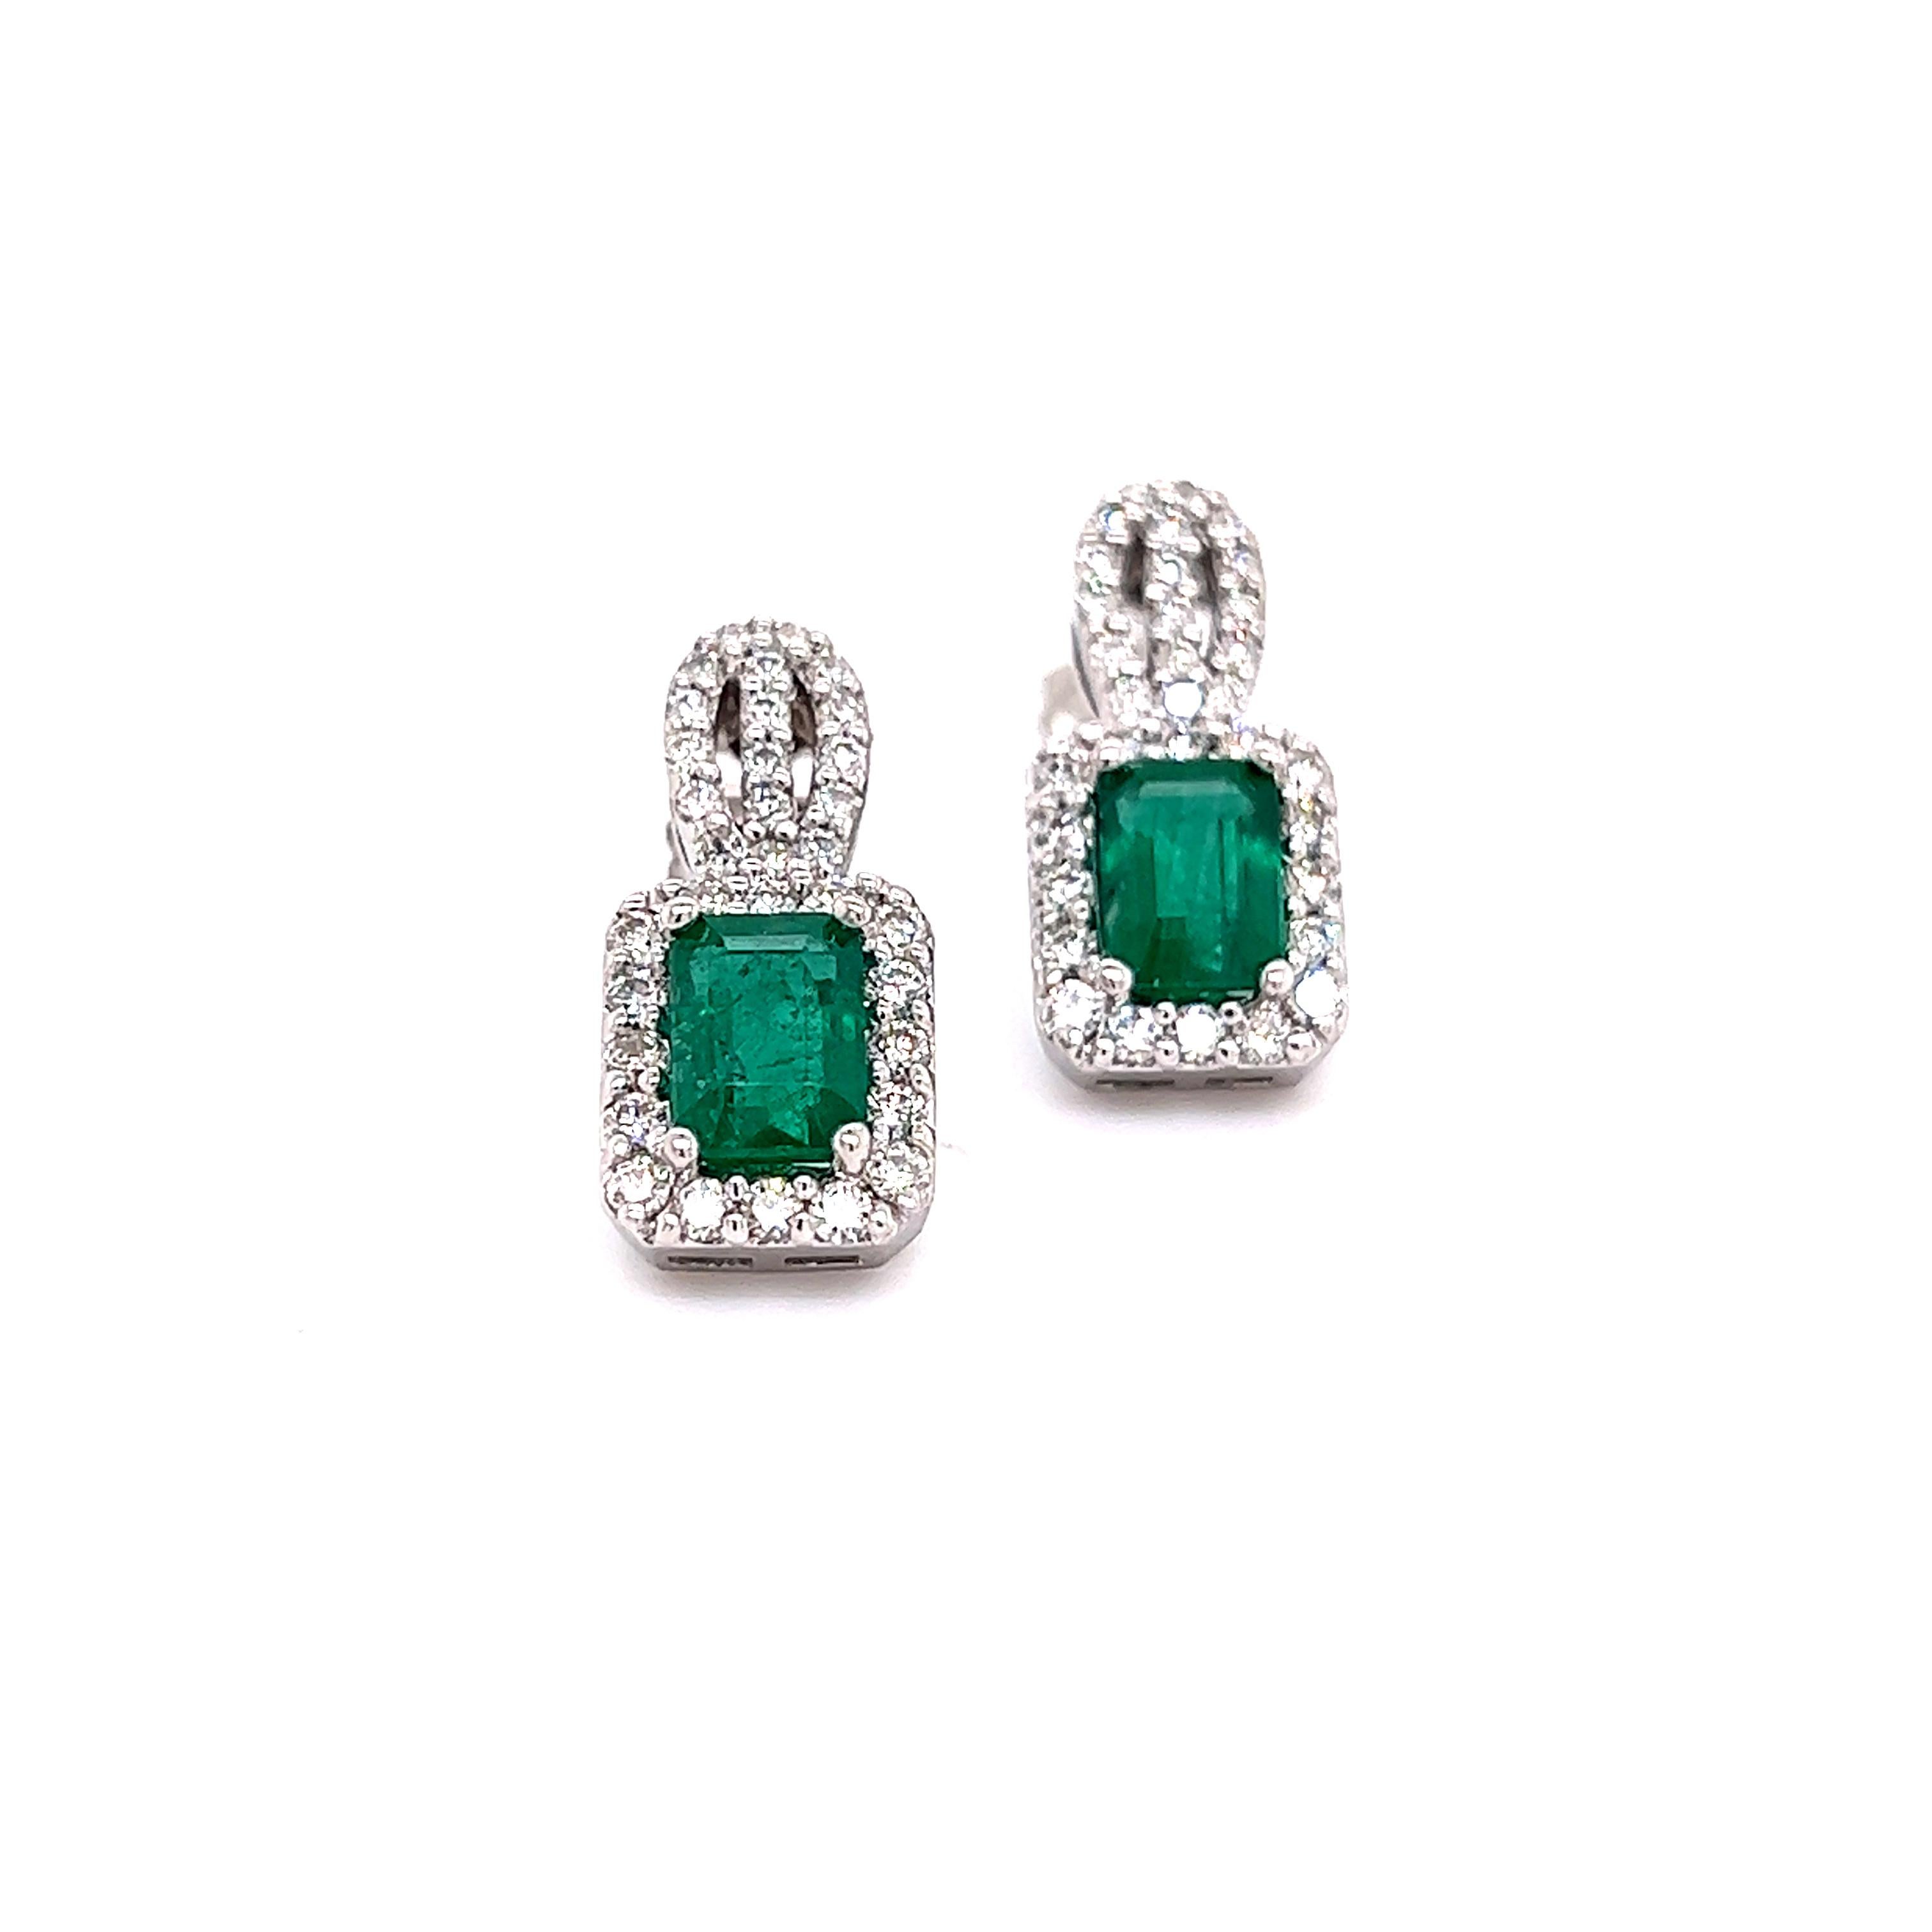 Natural Emerald Diamond Stud Earrings 14k Gold 2.74 TCW Certified For Sale 3